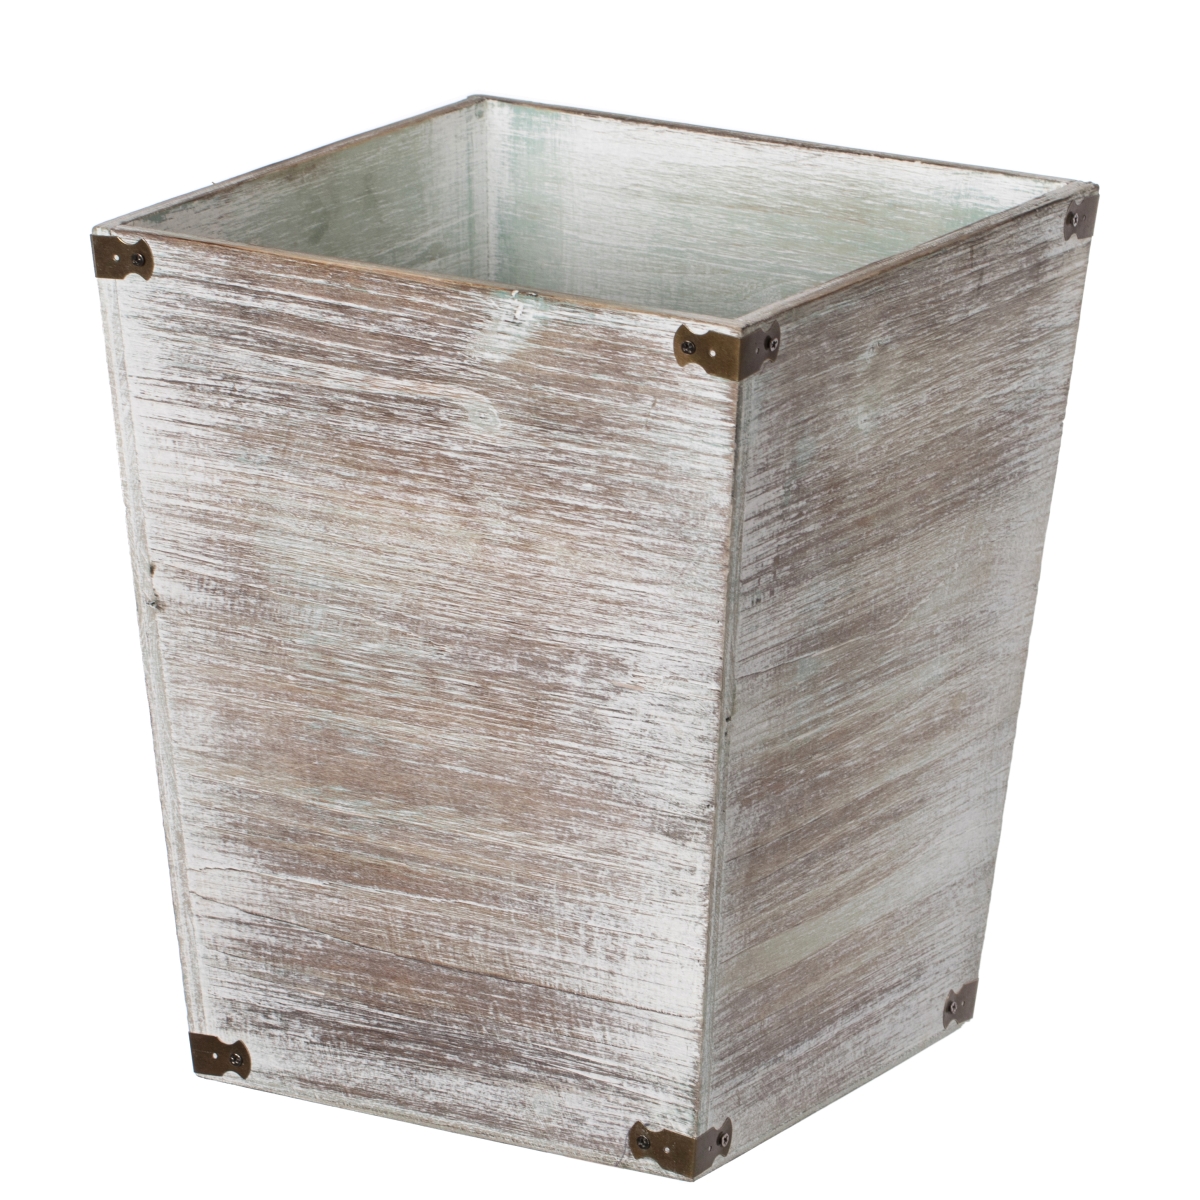 Picture of Vintiquewise QI004221 Home Decorative Dark Grey Rustic Wood Trash Can, Square Wastebasket Bin with Decorative Metal Brackets